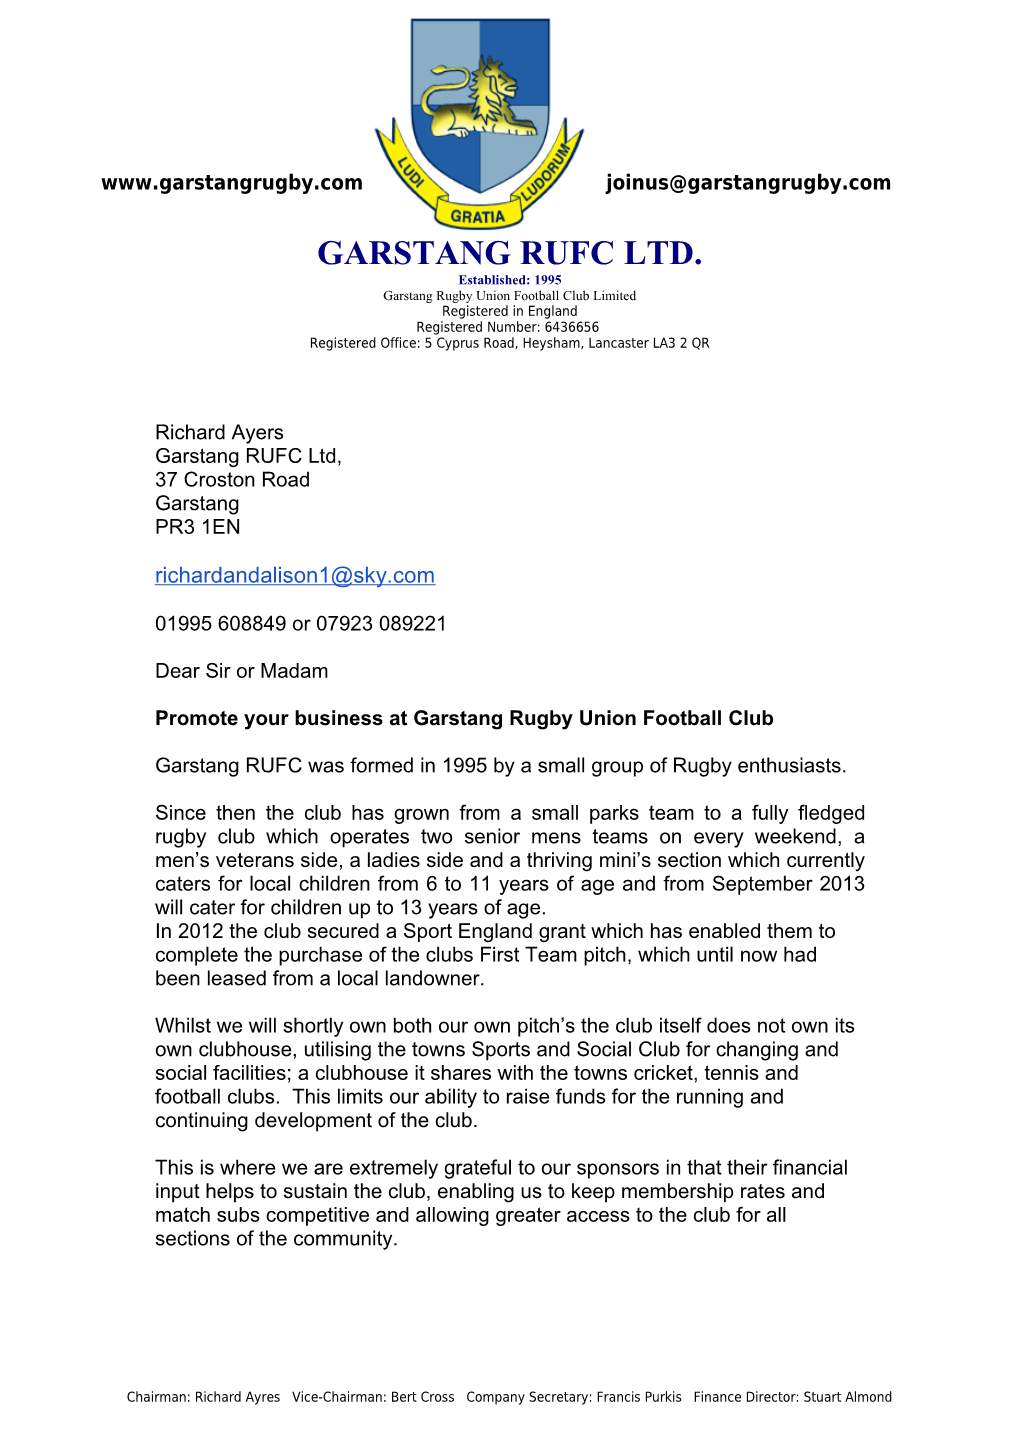 Promote Your Business at Garstang Rugby Union Football Club